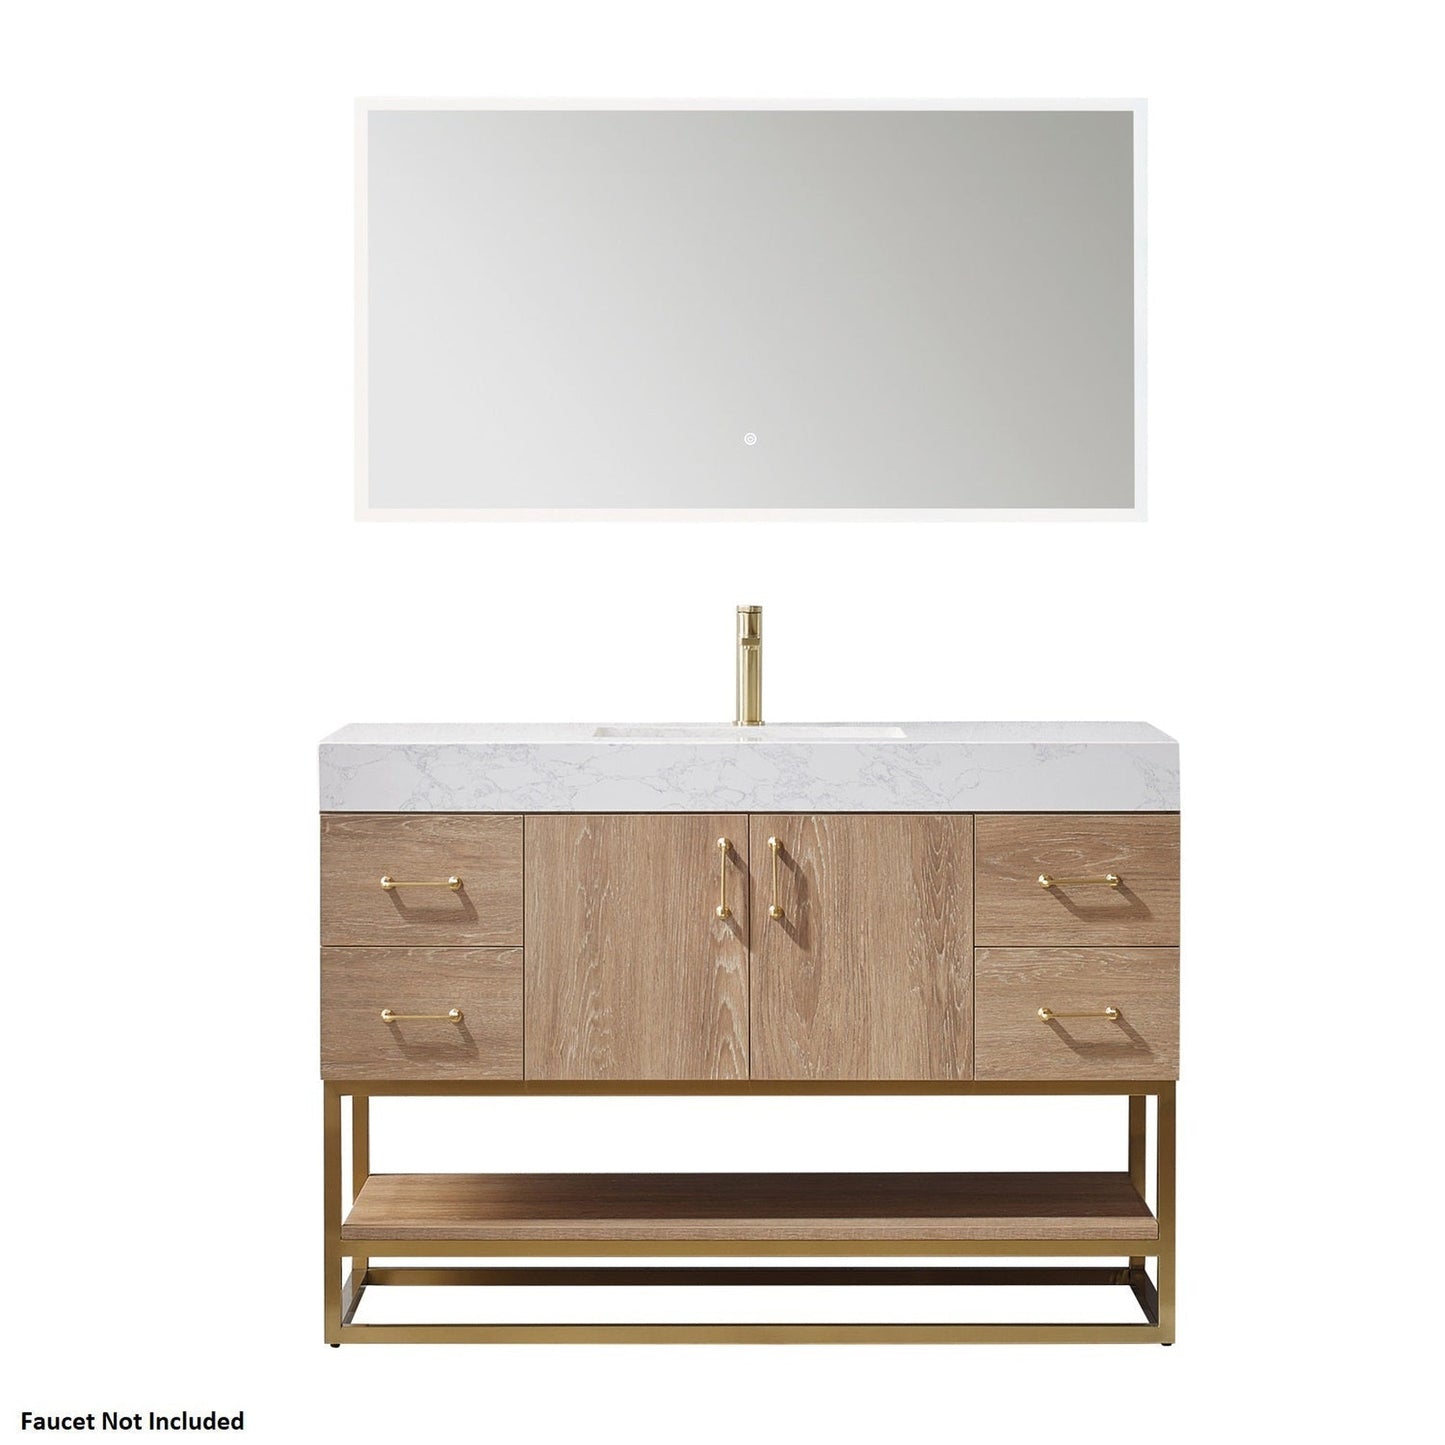 Vinnova Alistair 48" North American Oak Freestanding Single Vanity Set In Brushed Gold Metal Bracket Support Base and White Grain Stone Top With Undermount Ceramic Sink and Mirror